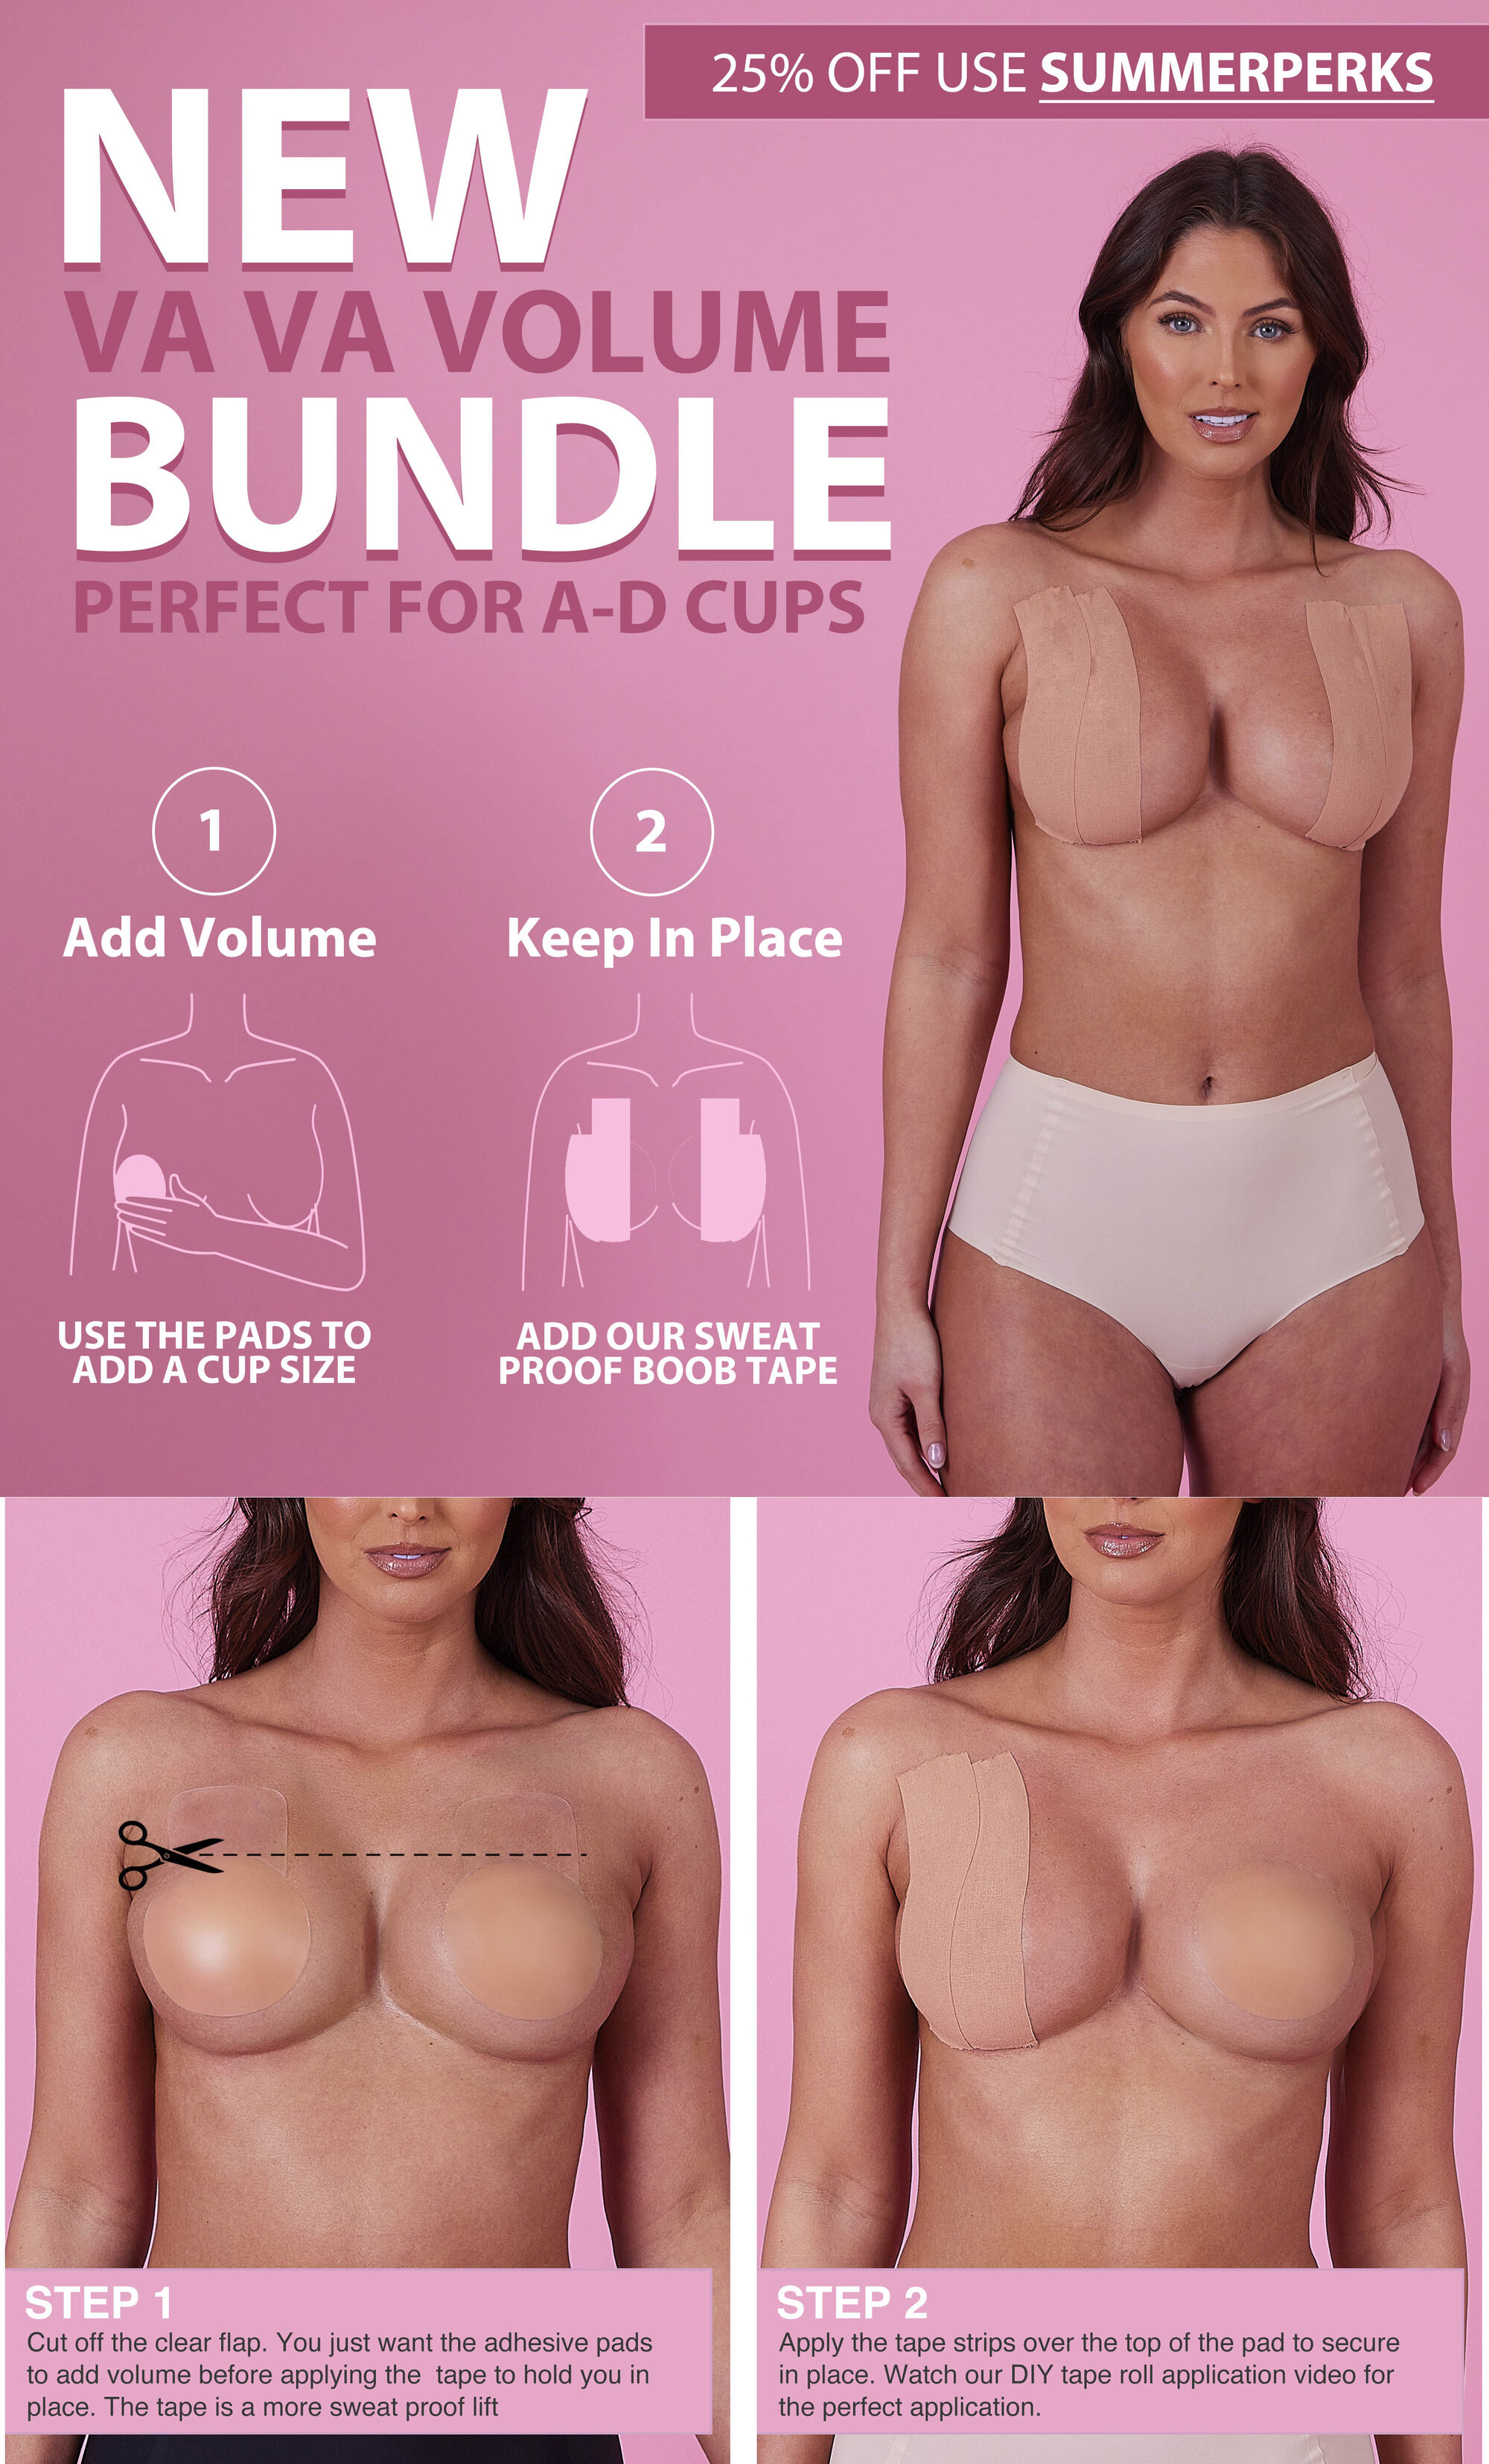 25% off NEW Volume Cleavage Bundle! - Perky Pear